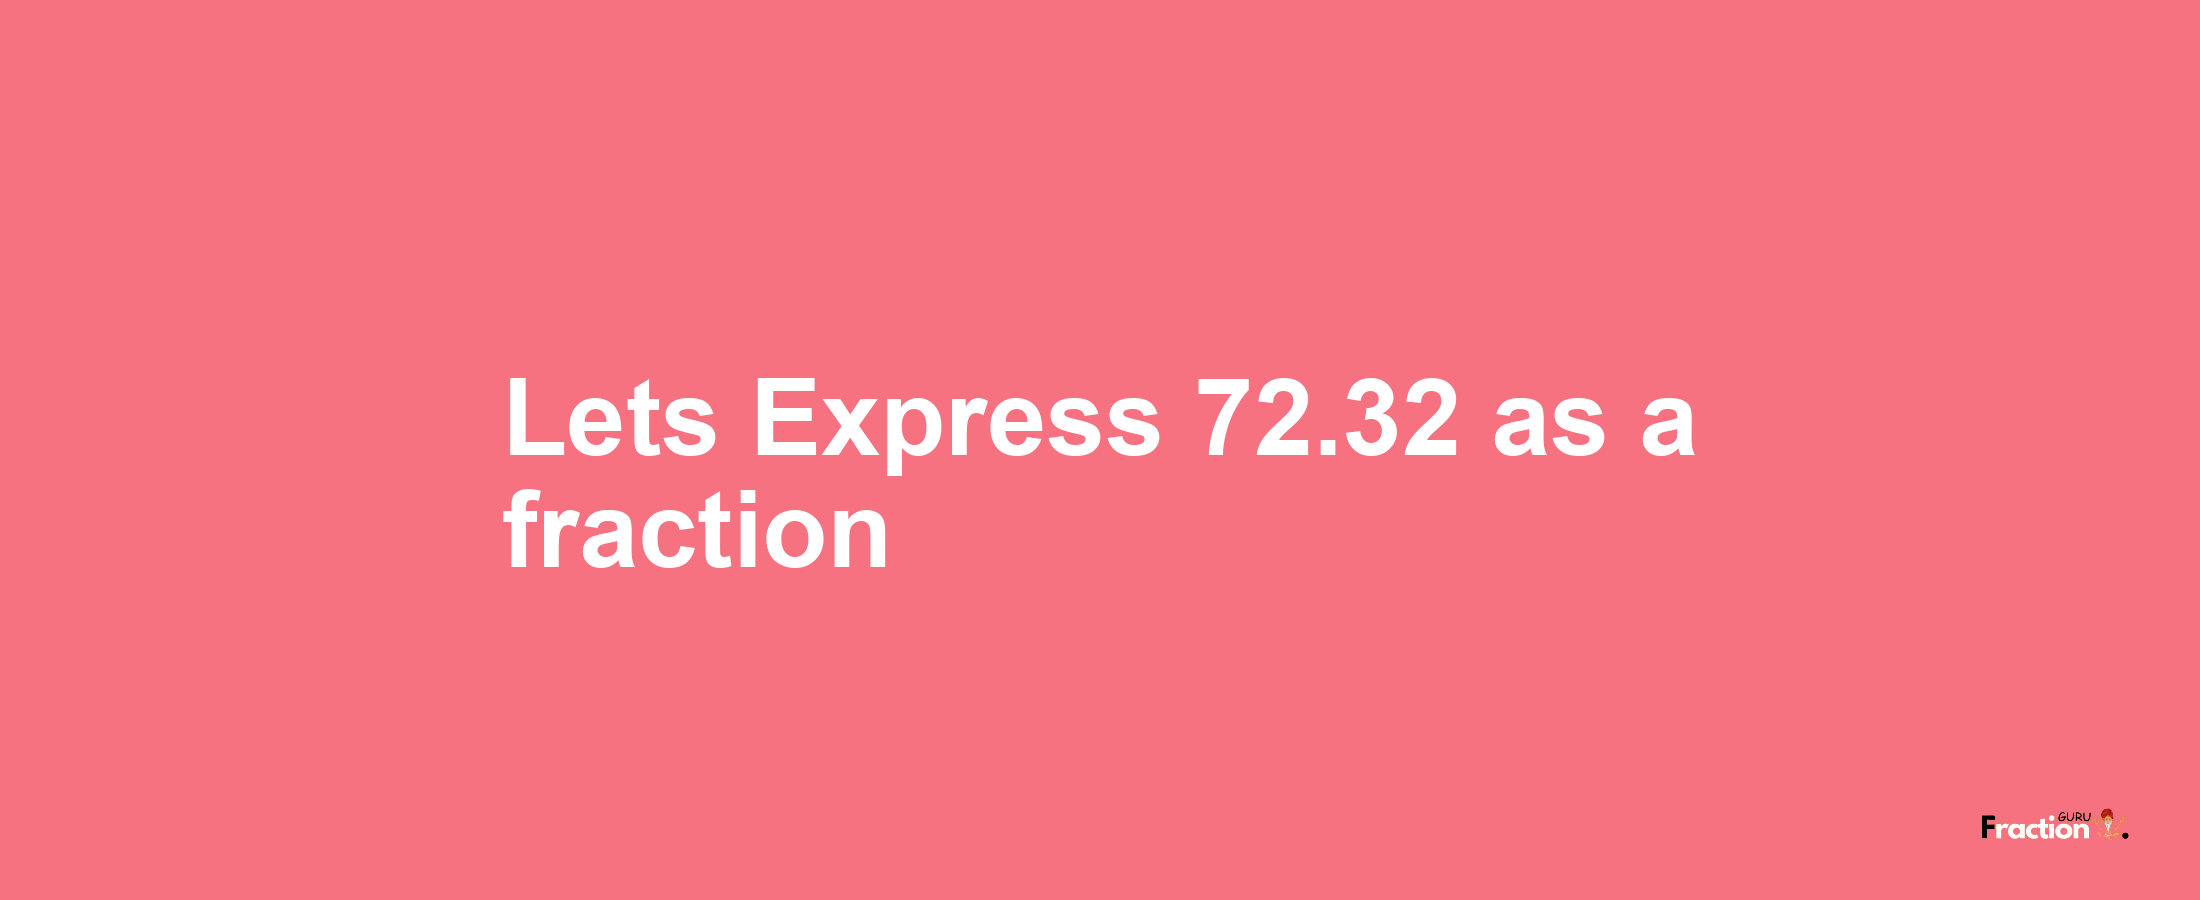 Lets Express 72.32 as afraction